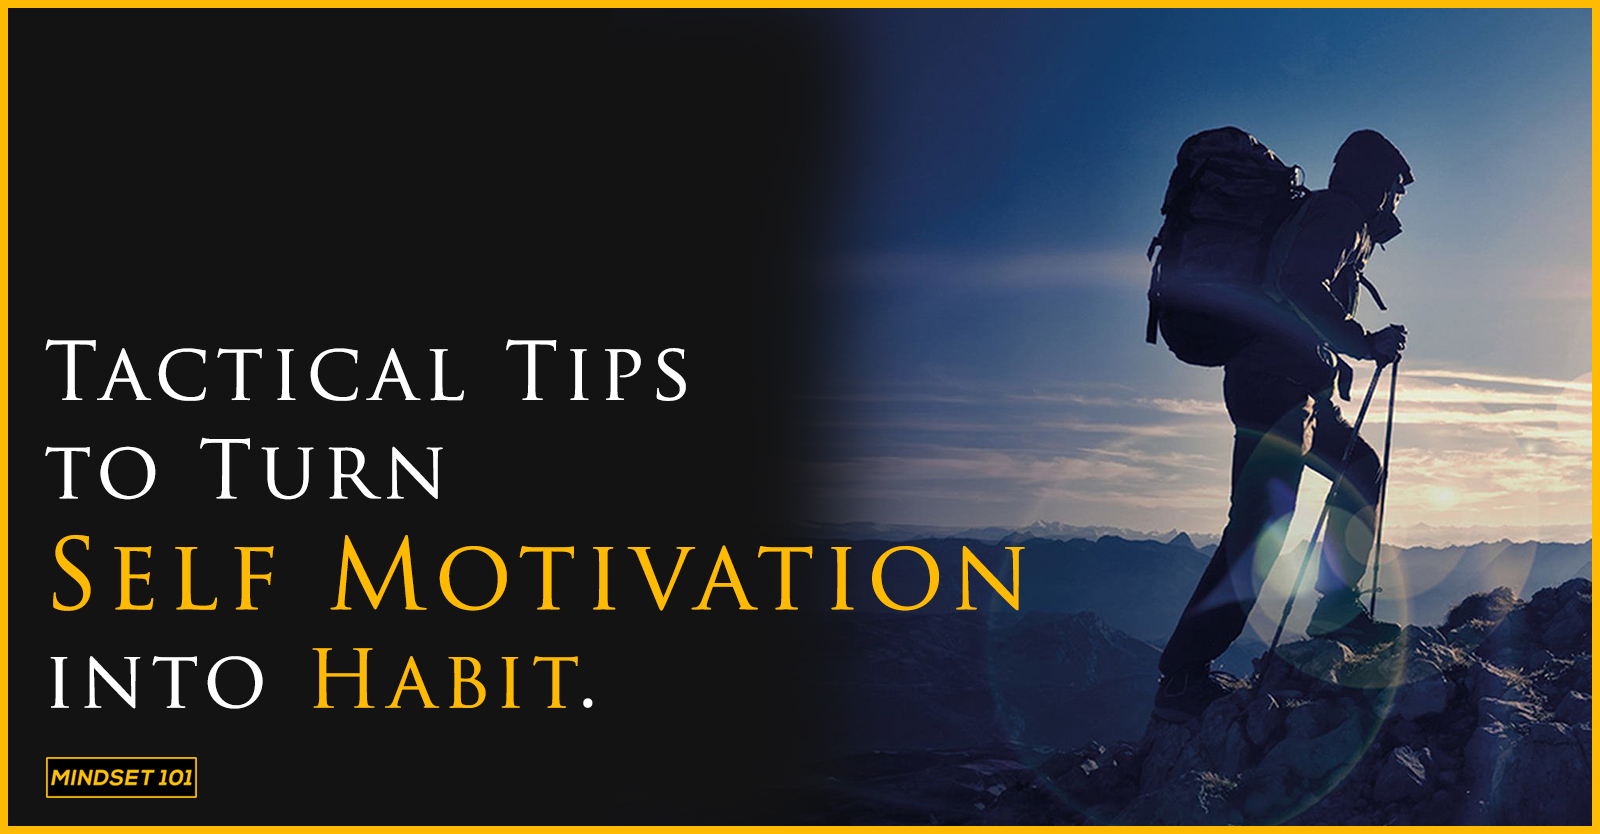 Here's how to Turn Self Motivation into Habbit.